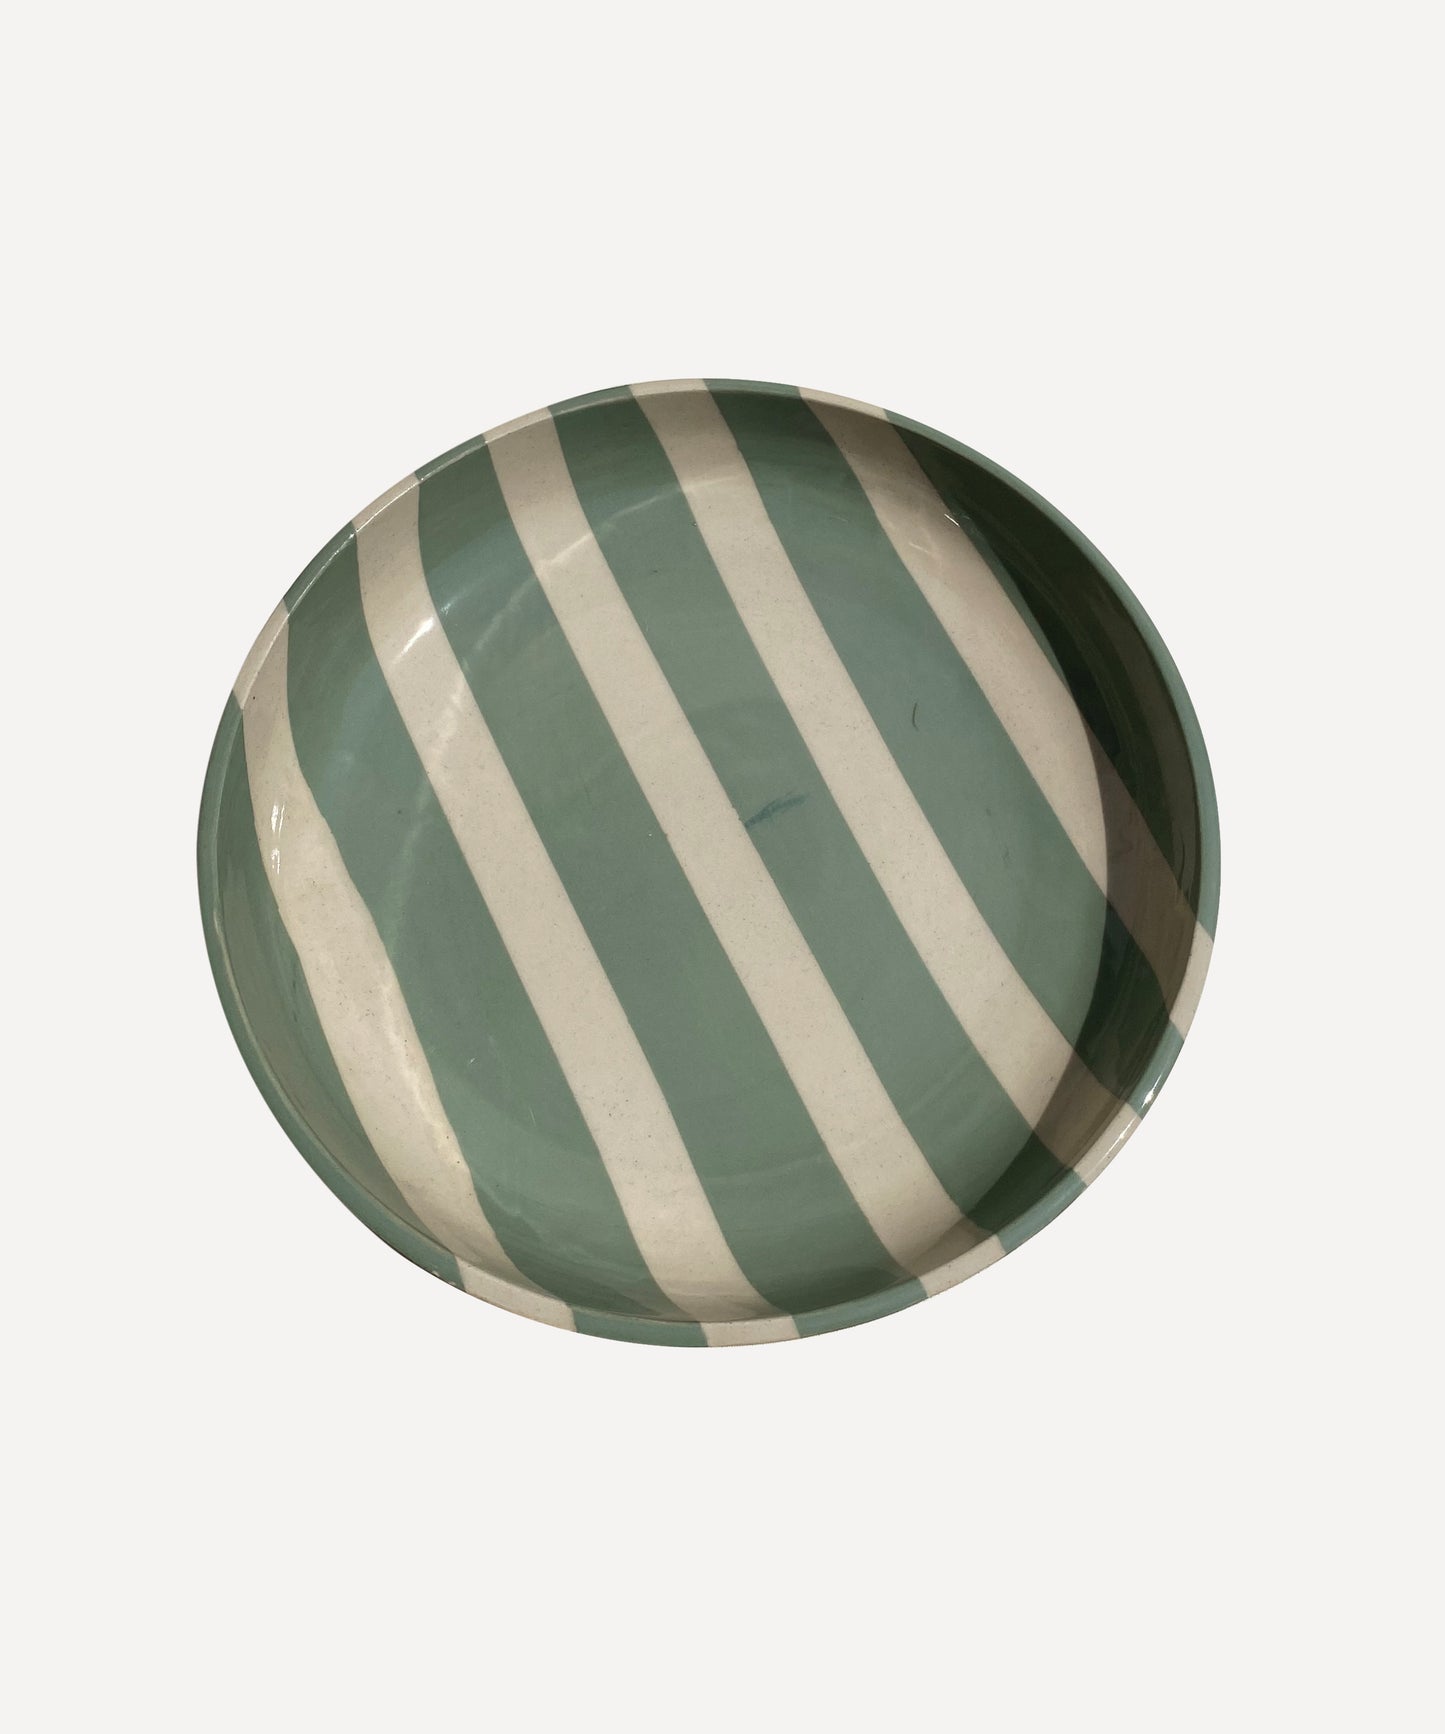 Duci Striped Bowl in Green